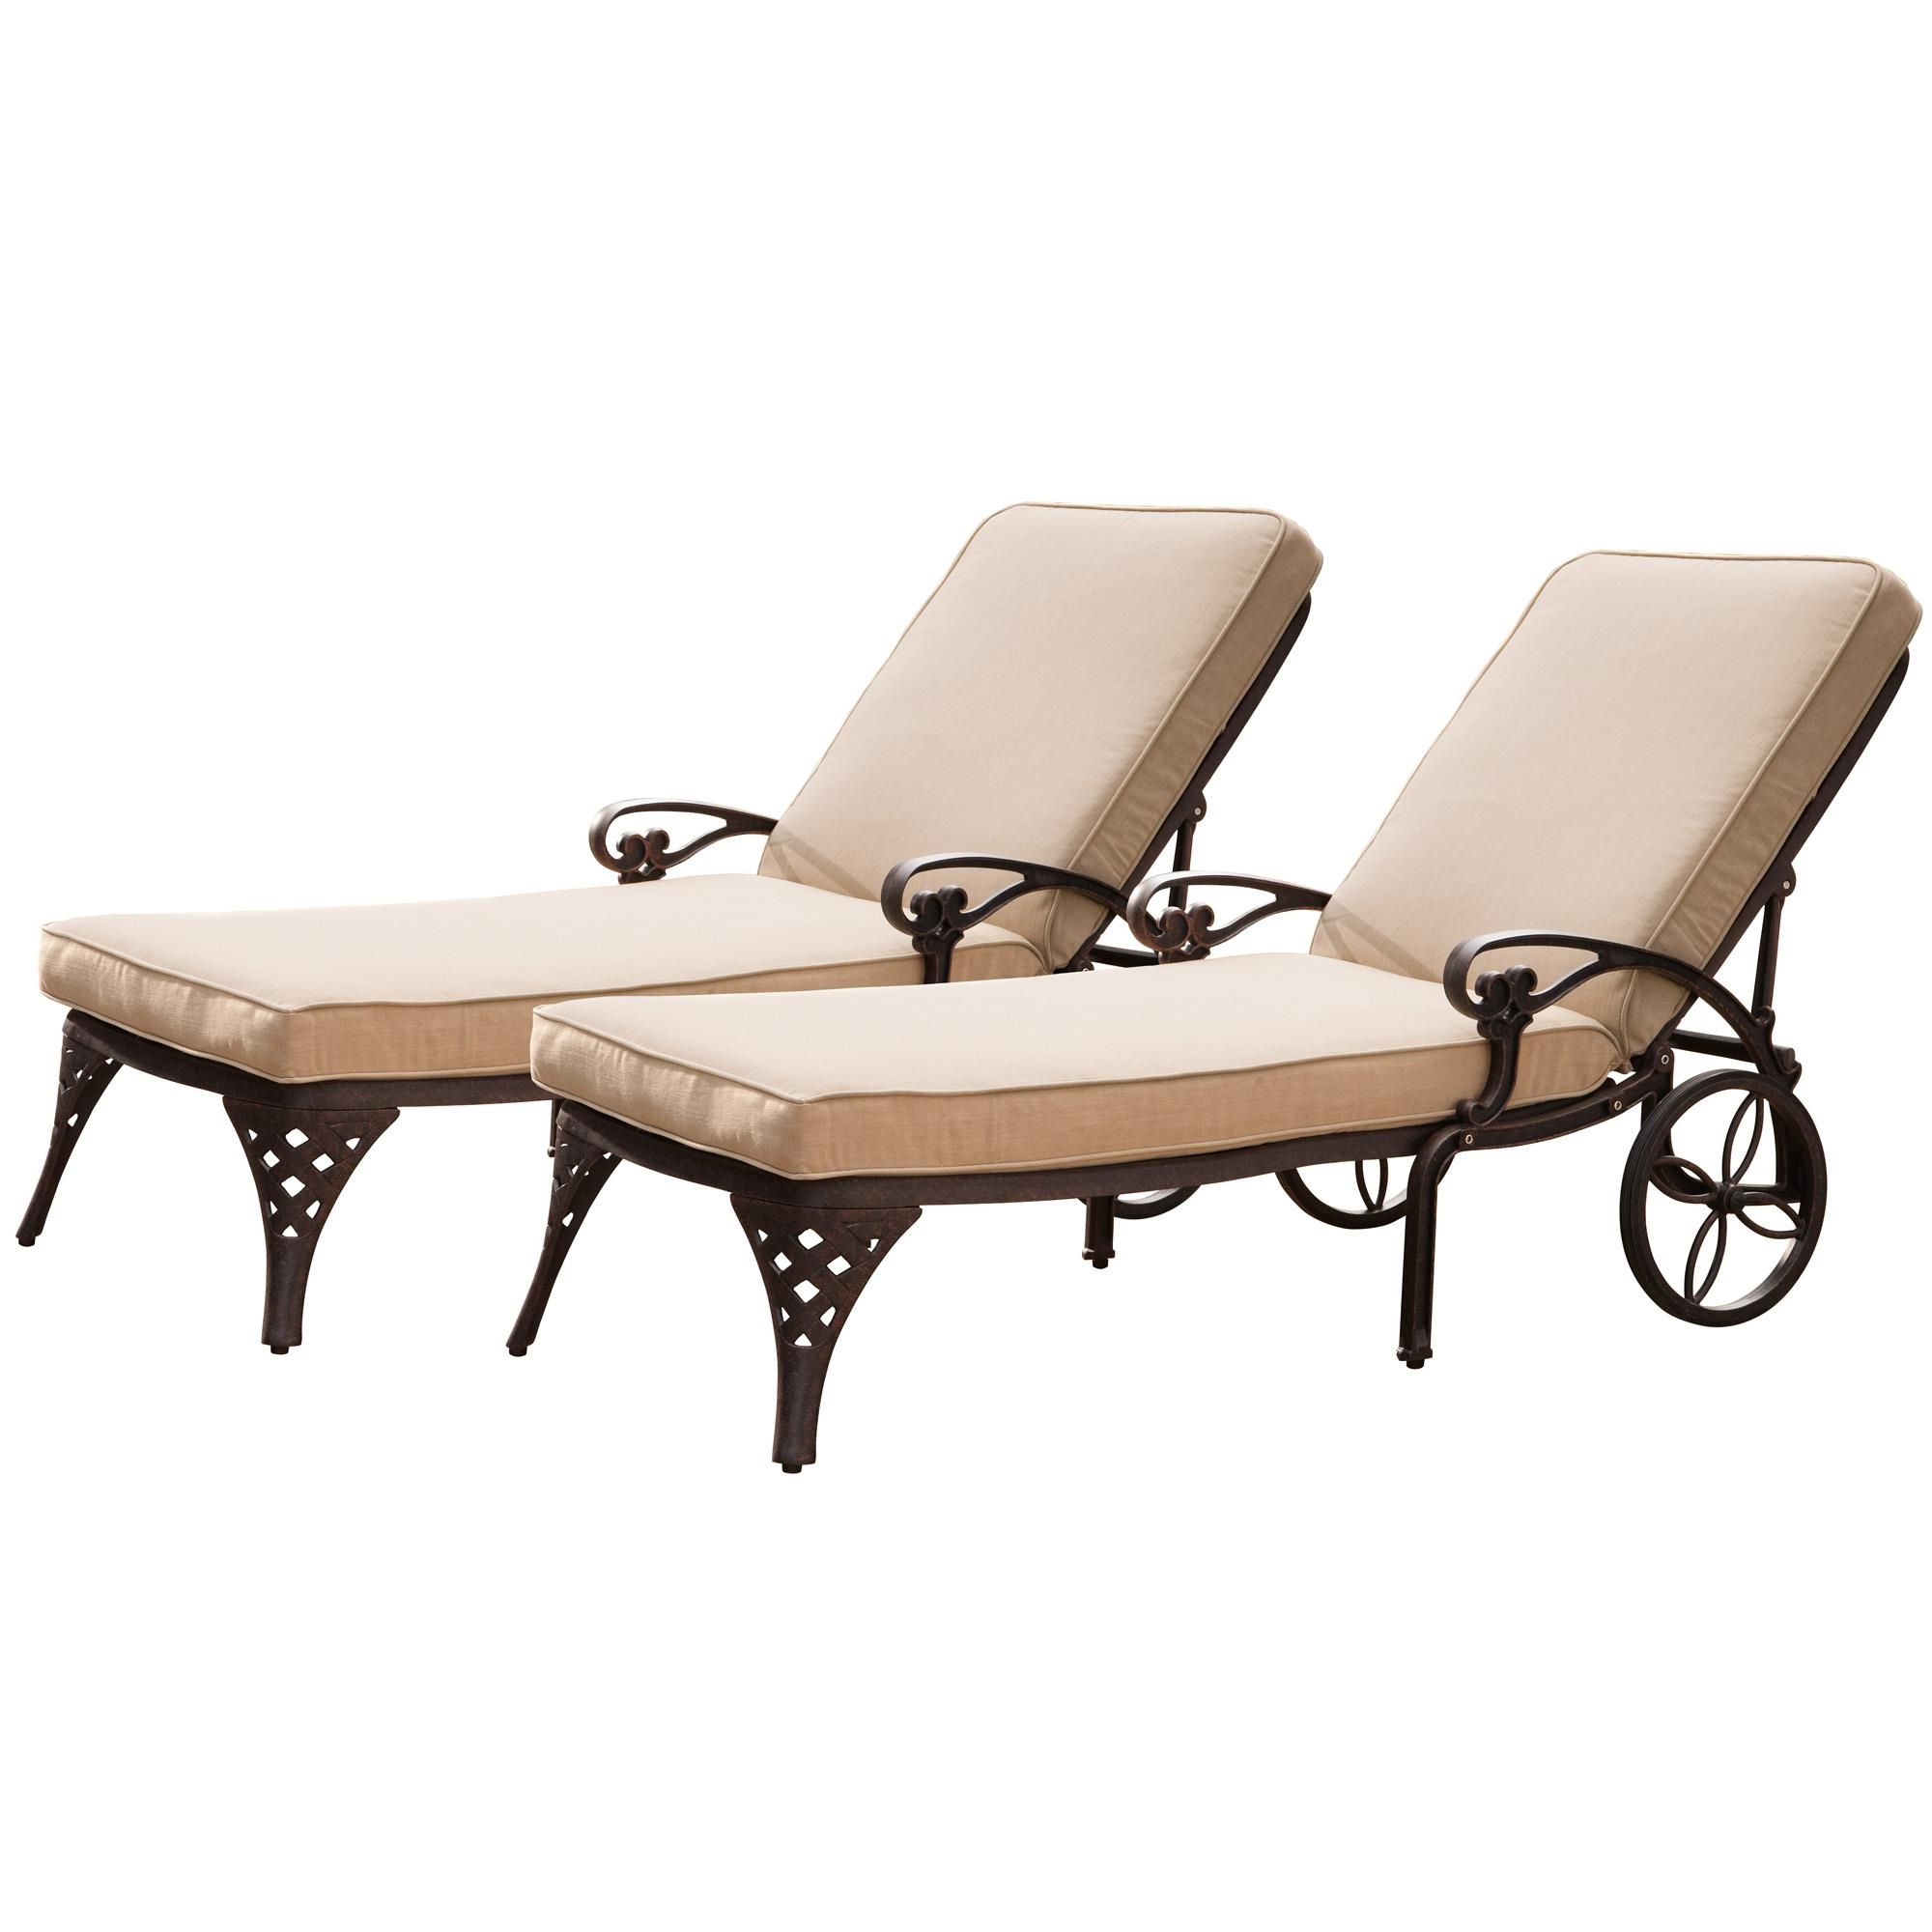 Furniture: Stylish Lowes Lounge Chairs For Your Relax Throughout Trendy Chaise Lounge Chairs At Lowes (View 9 of 15)